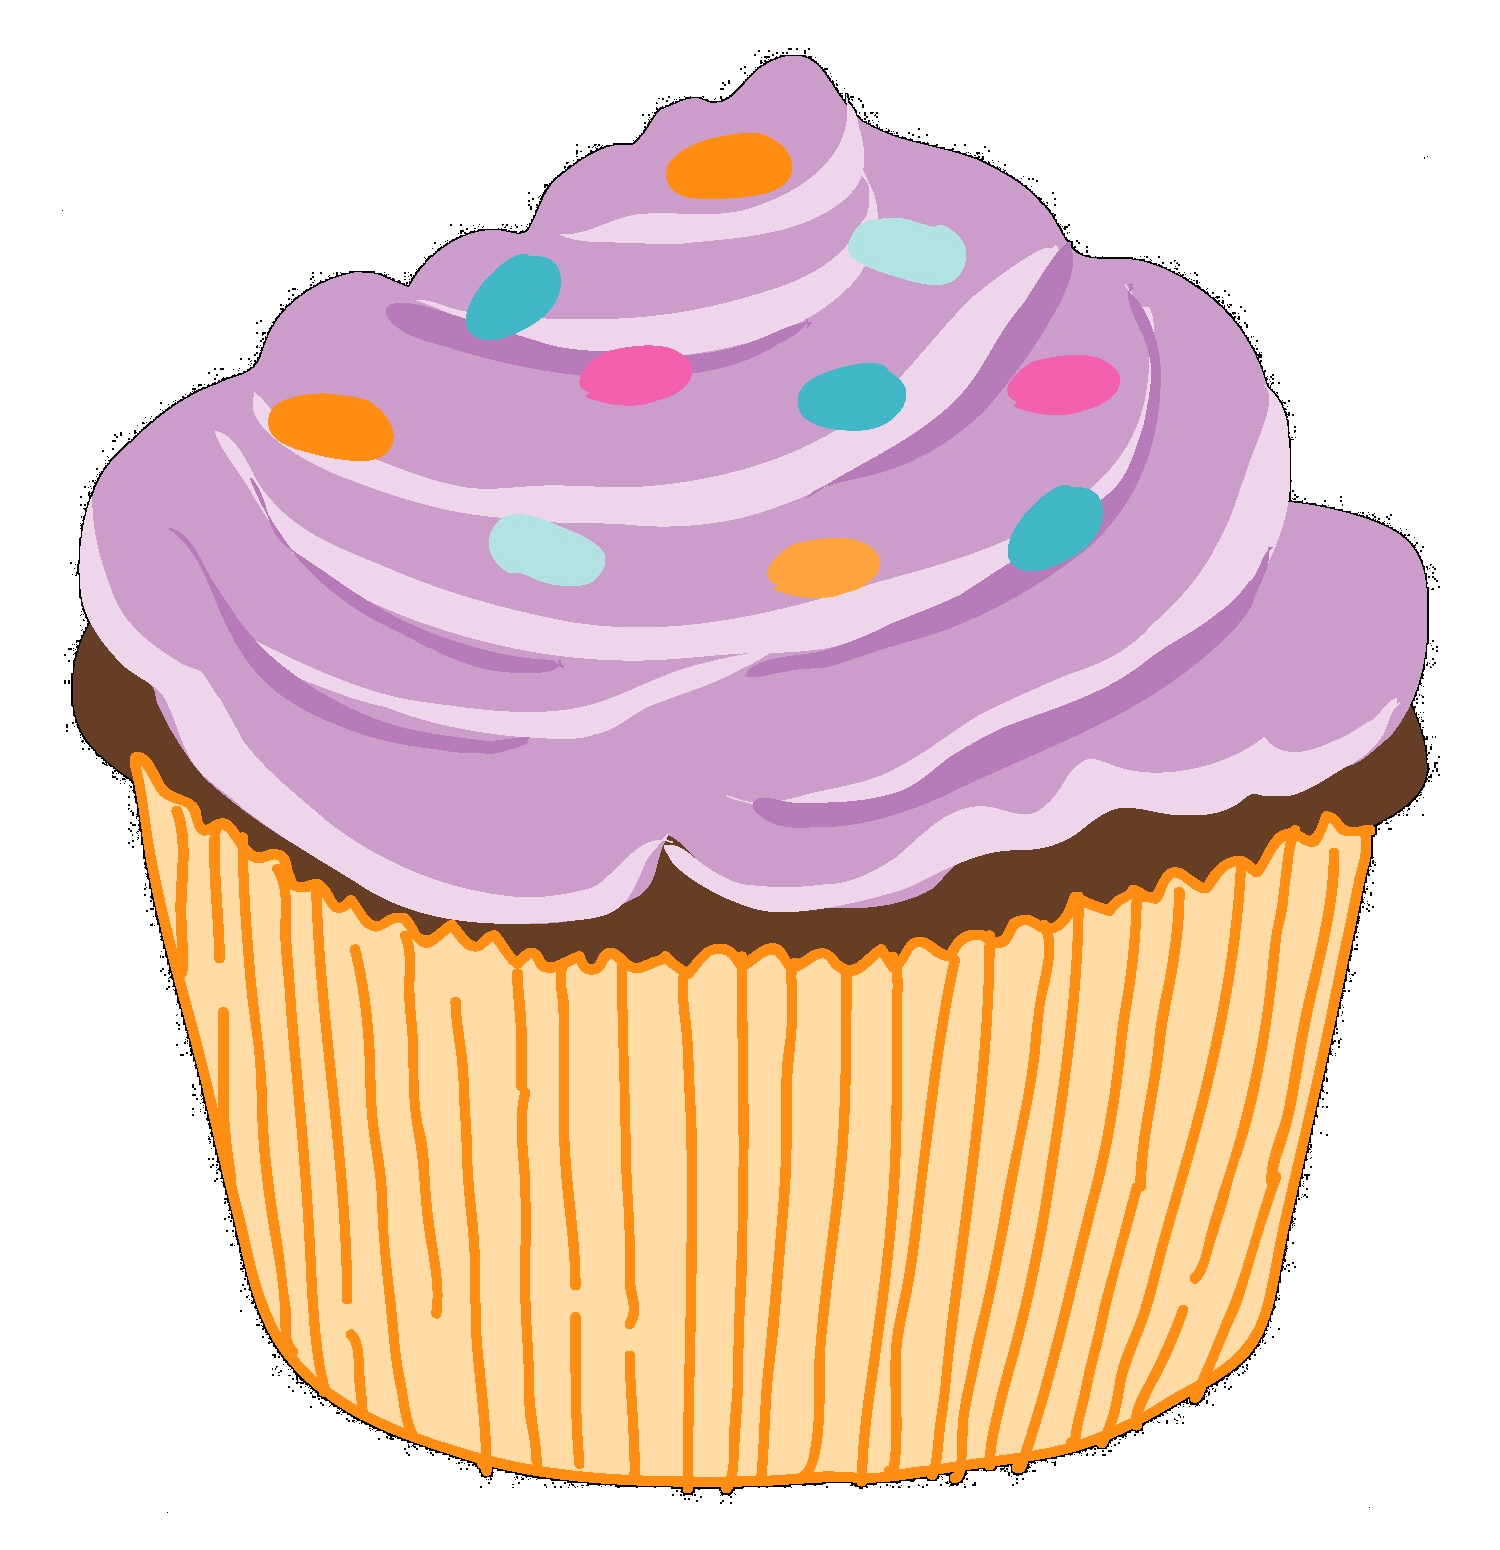 Cupcake Images Clipart - ClipArt Best